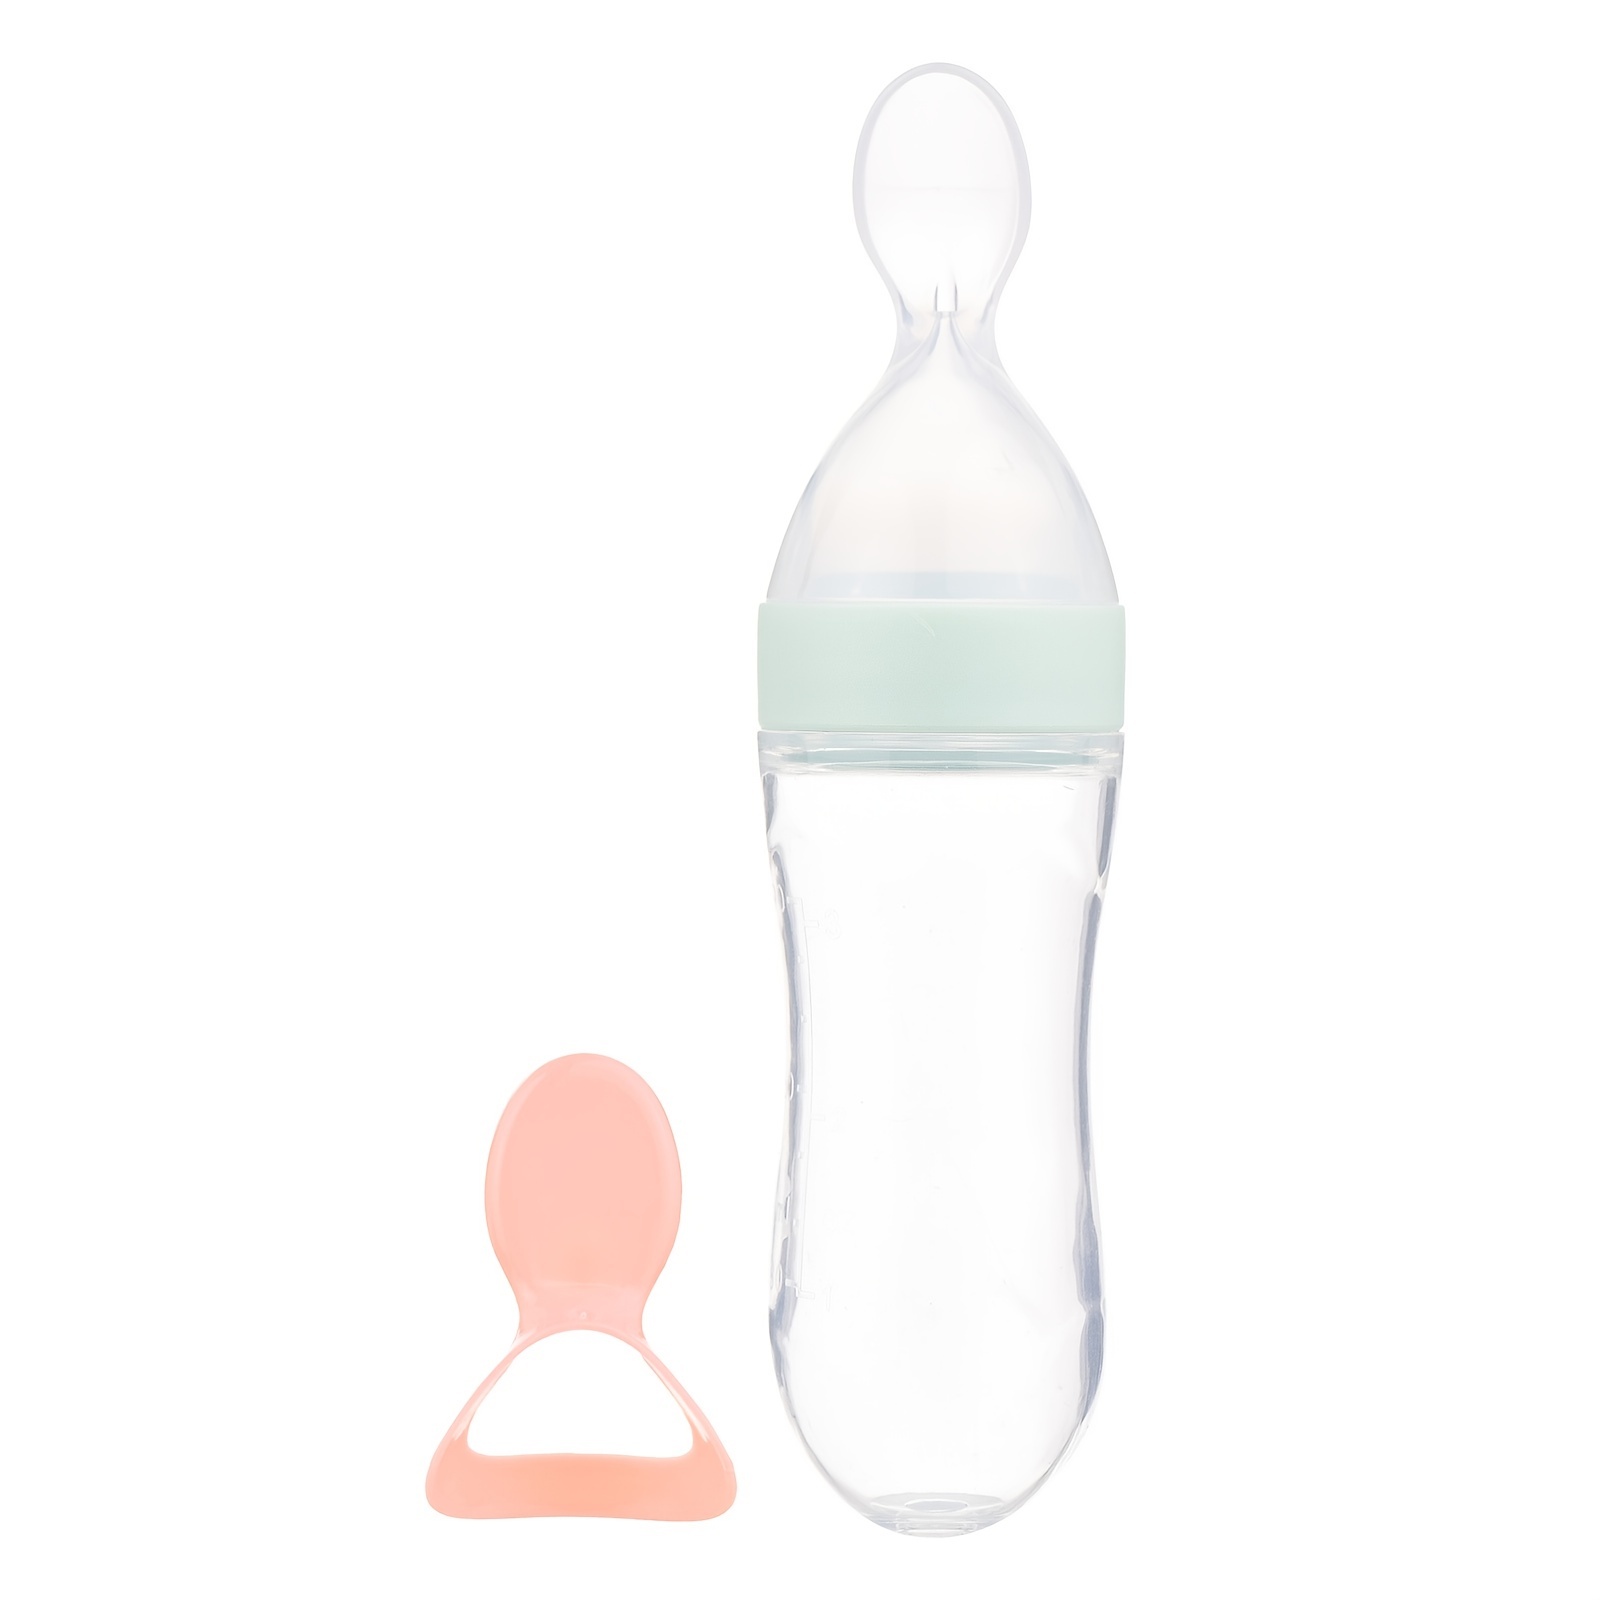 AMERTEER Silicone Baby Food Dispensing Spoon - Squeeze Feeder with Spoon -  Spoon Bottle for Baby - Baby Spoon Feeder Bottle Baby Solid Food Feeder